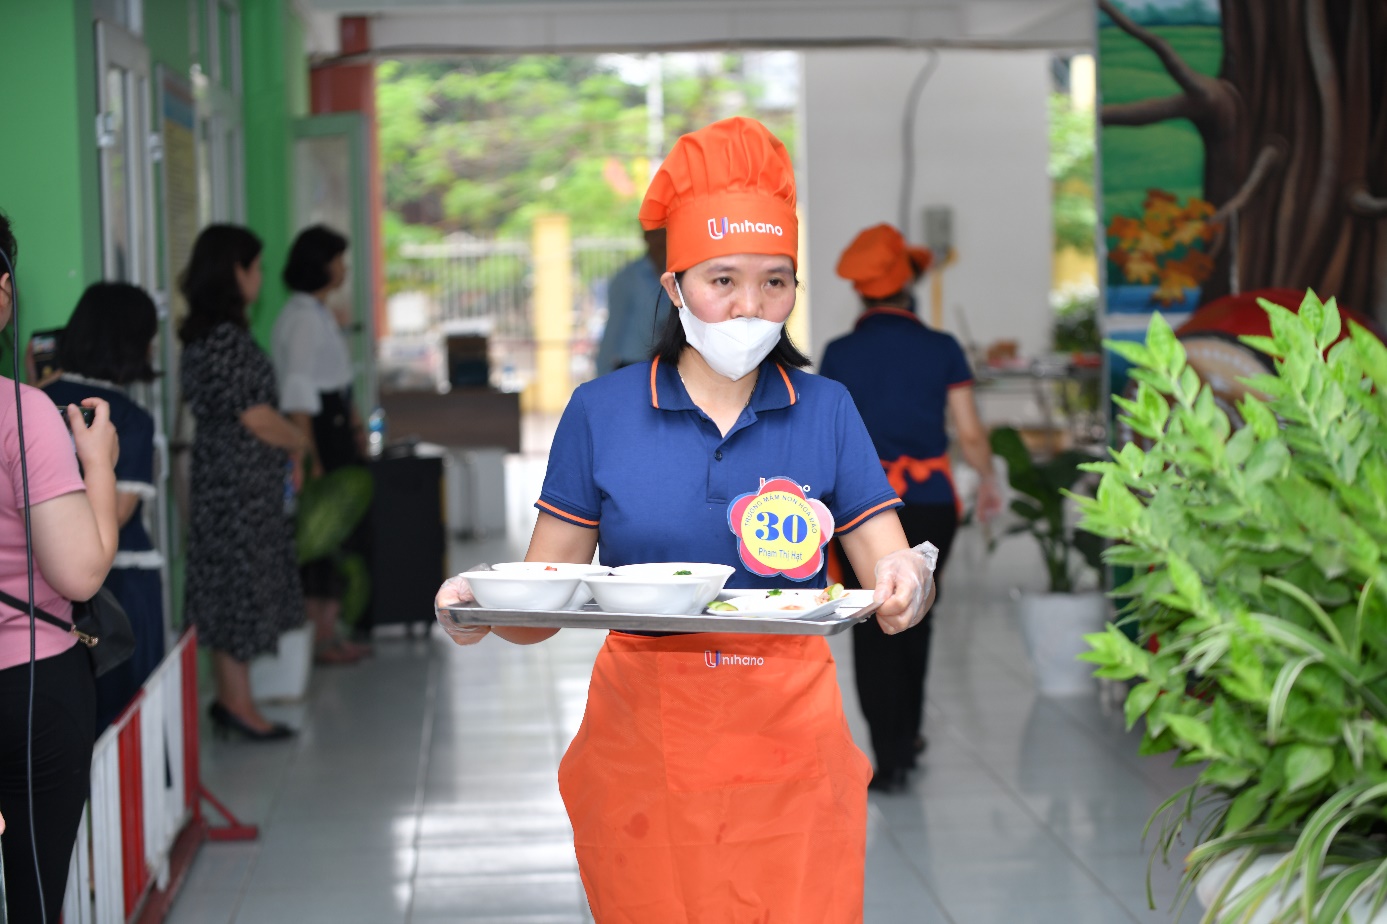 A person wearing a mask and holding a tray of food

Description automatically generated